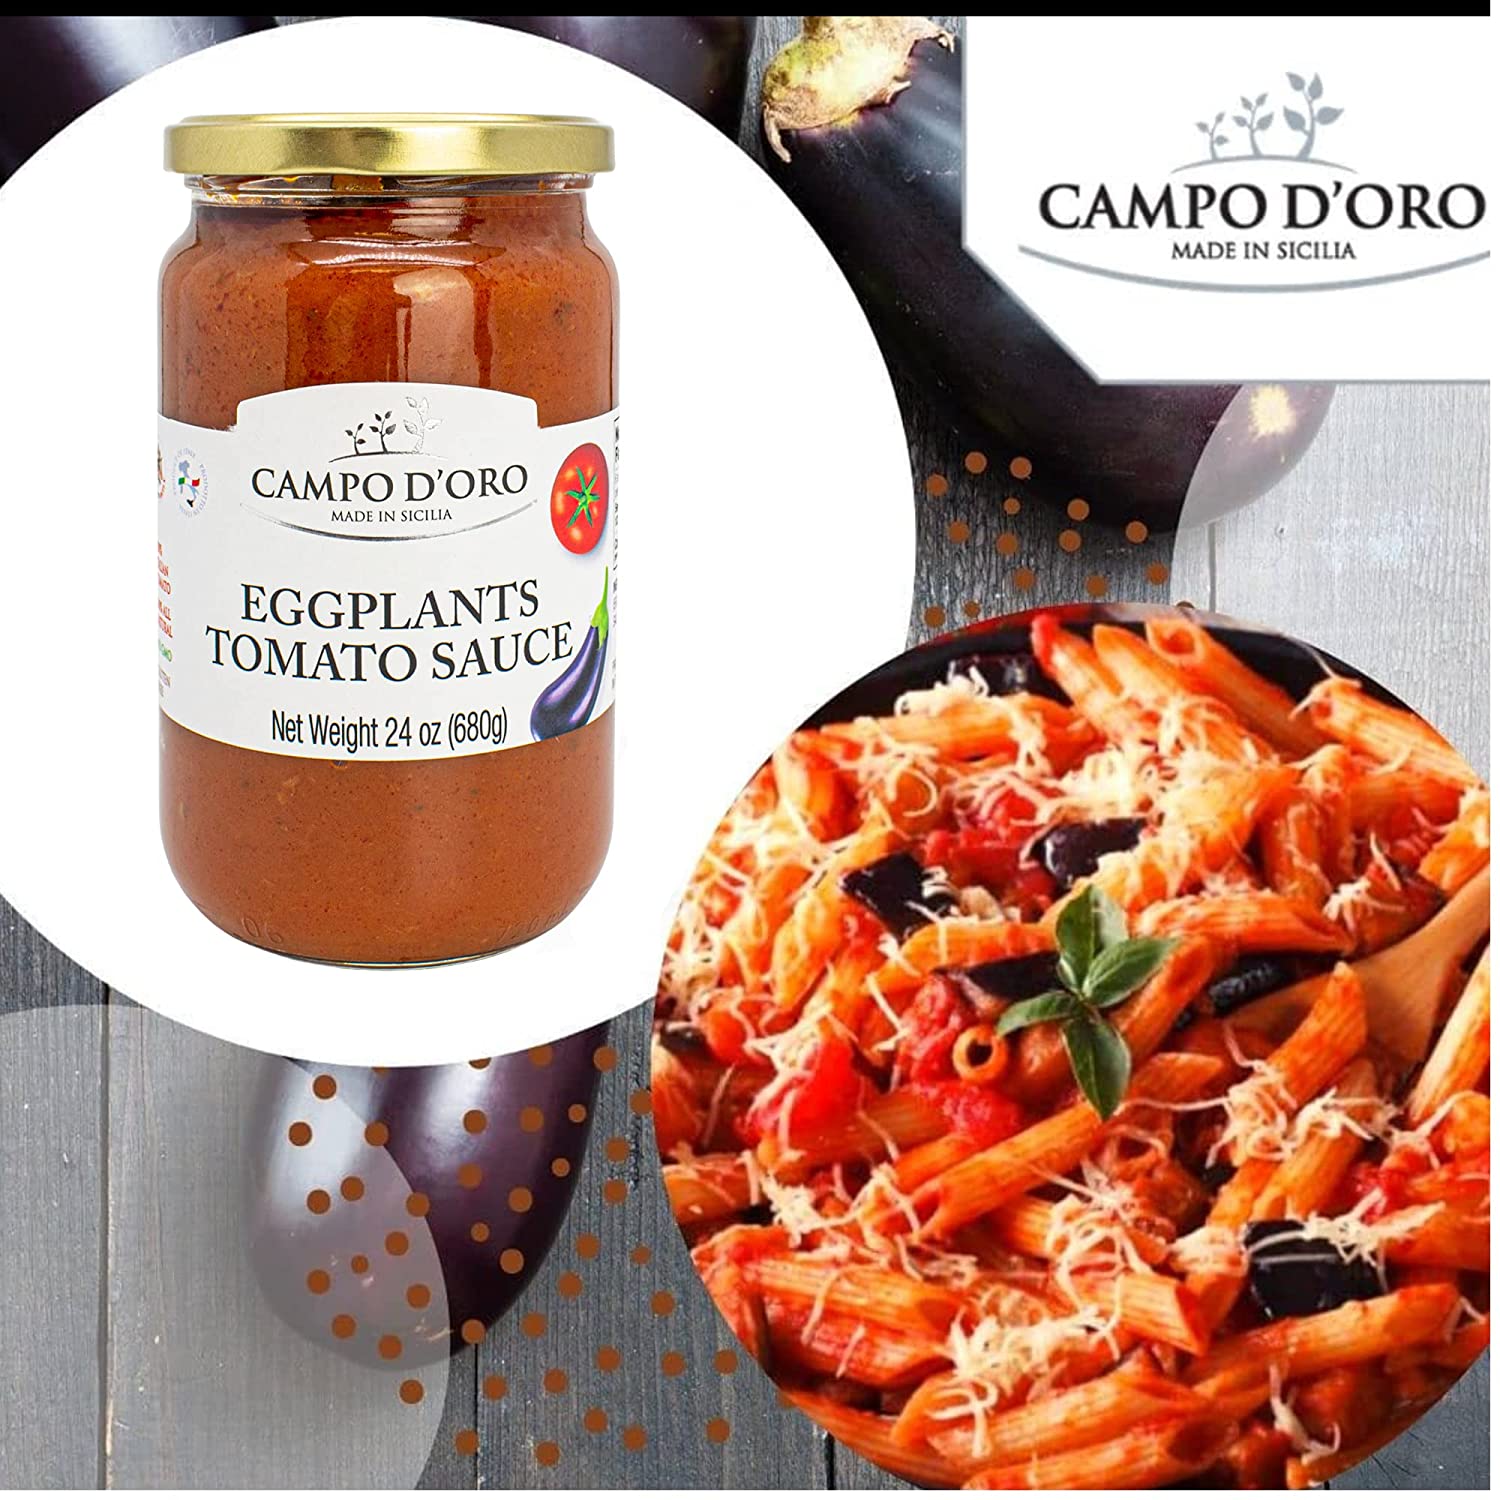 Italian Tomato Sauce with Eggplant, Made with Extra Virgin Olive Oil and Eggplants. 100% Natural, Italian, Jar 24oz (680g). Non-GMO, Gluten Free, By Campo D'Oro Italian Sausages